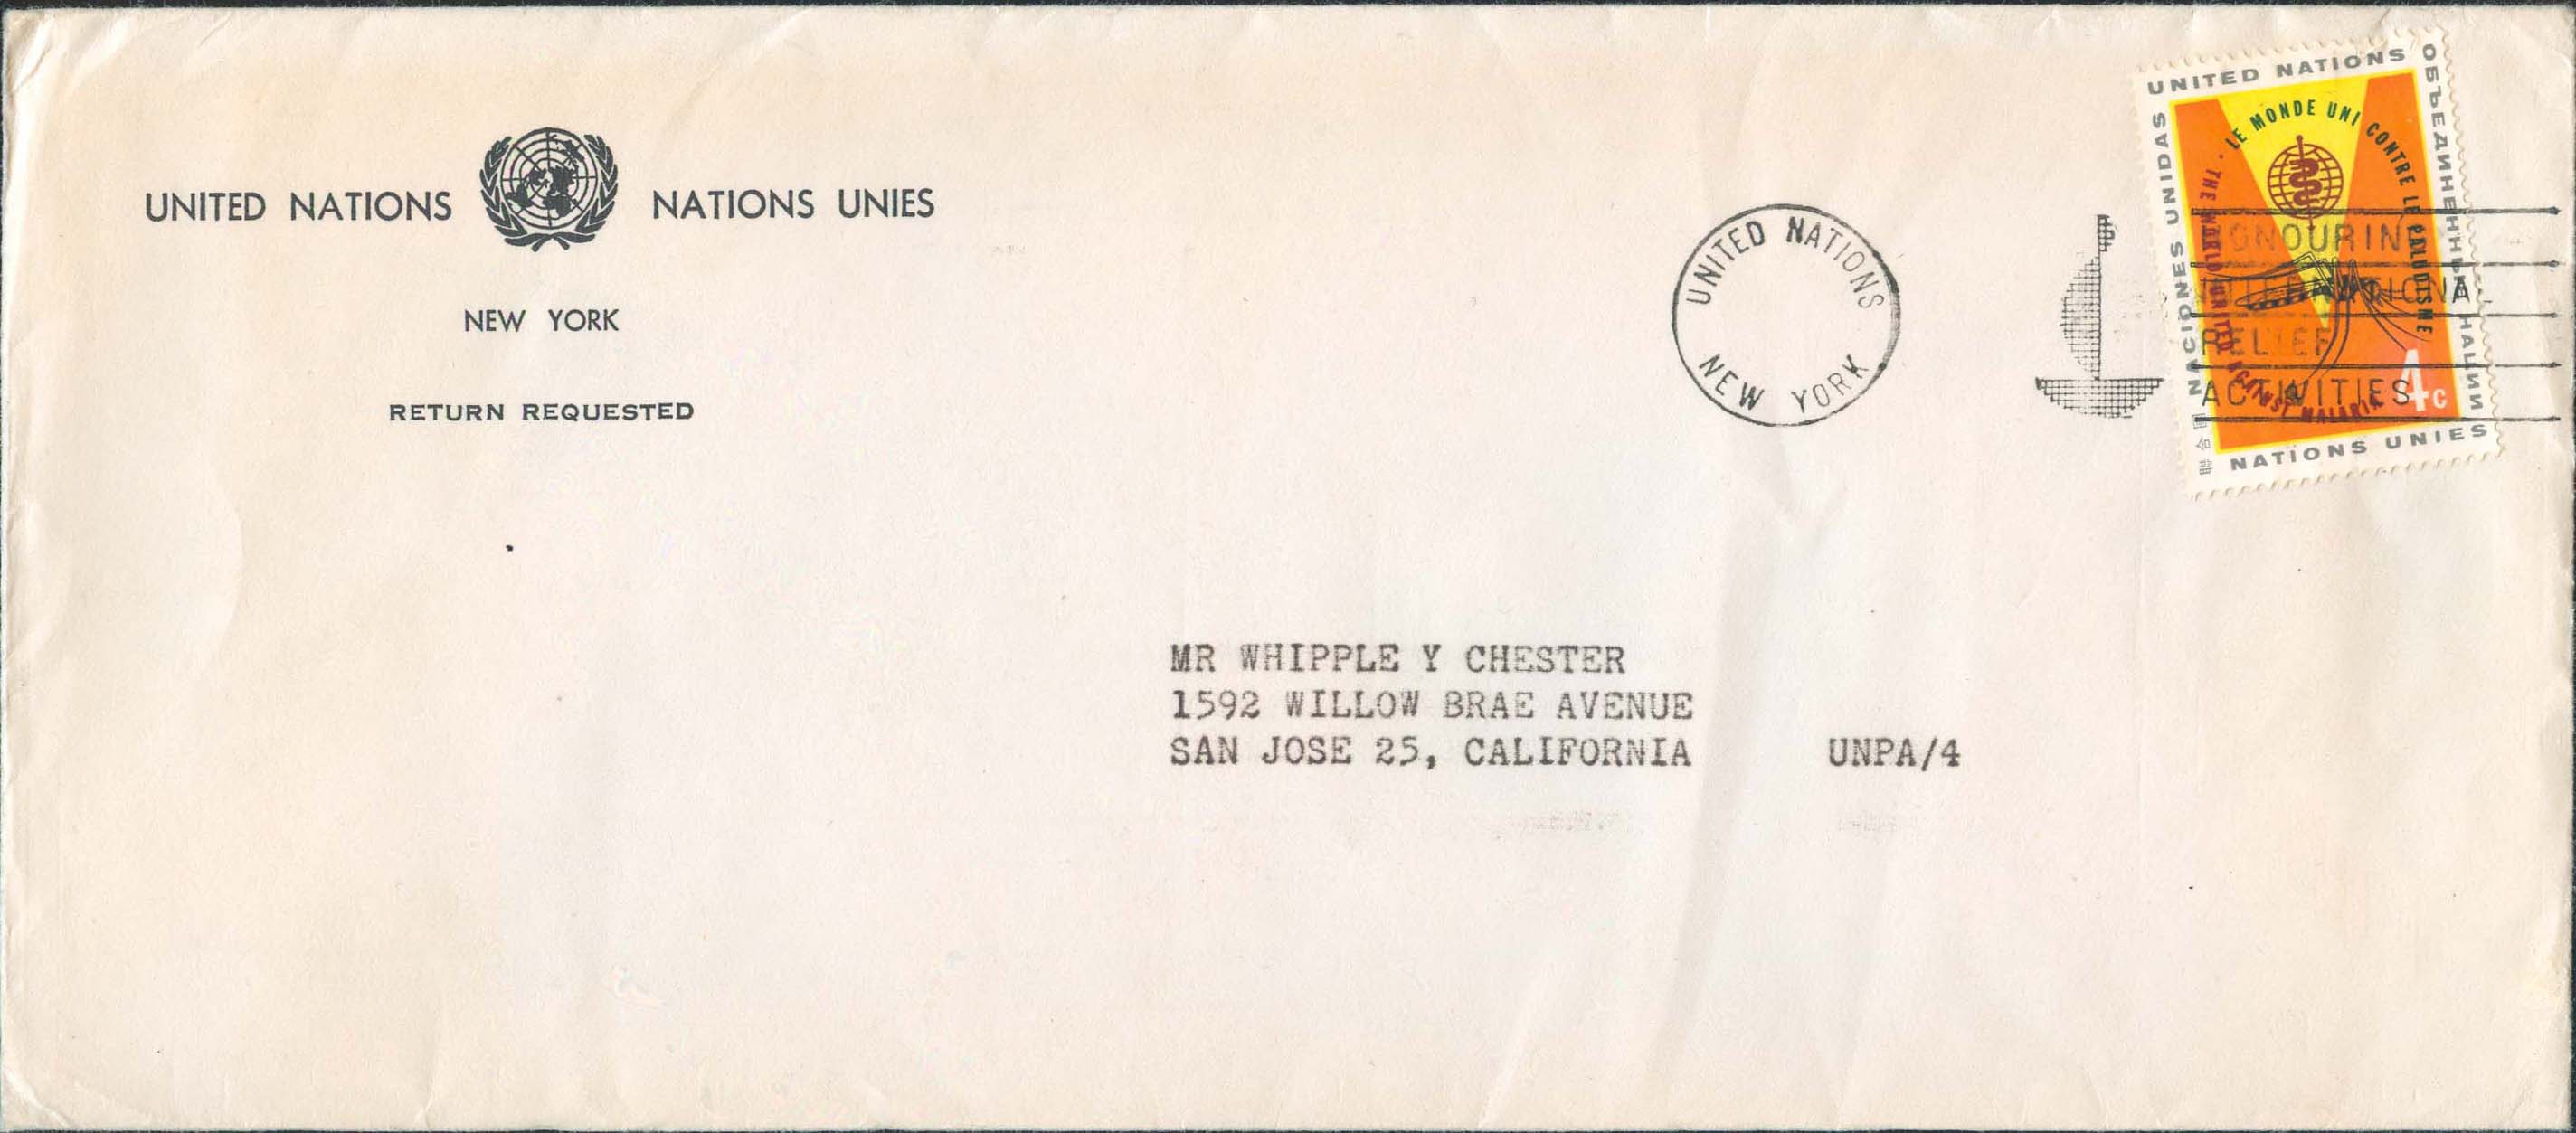 3rd Class mailing (contents dated September 15, 1963) with United Nations Scott 102.